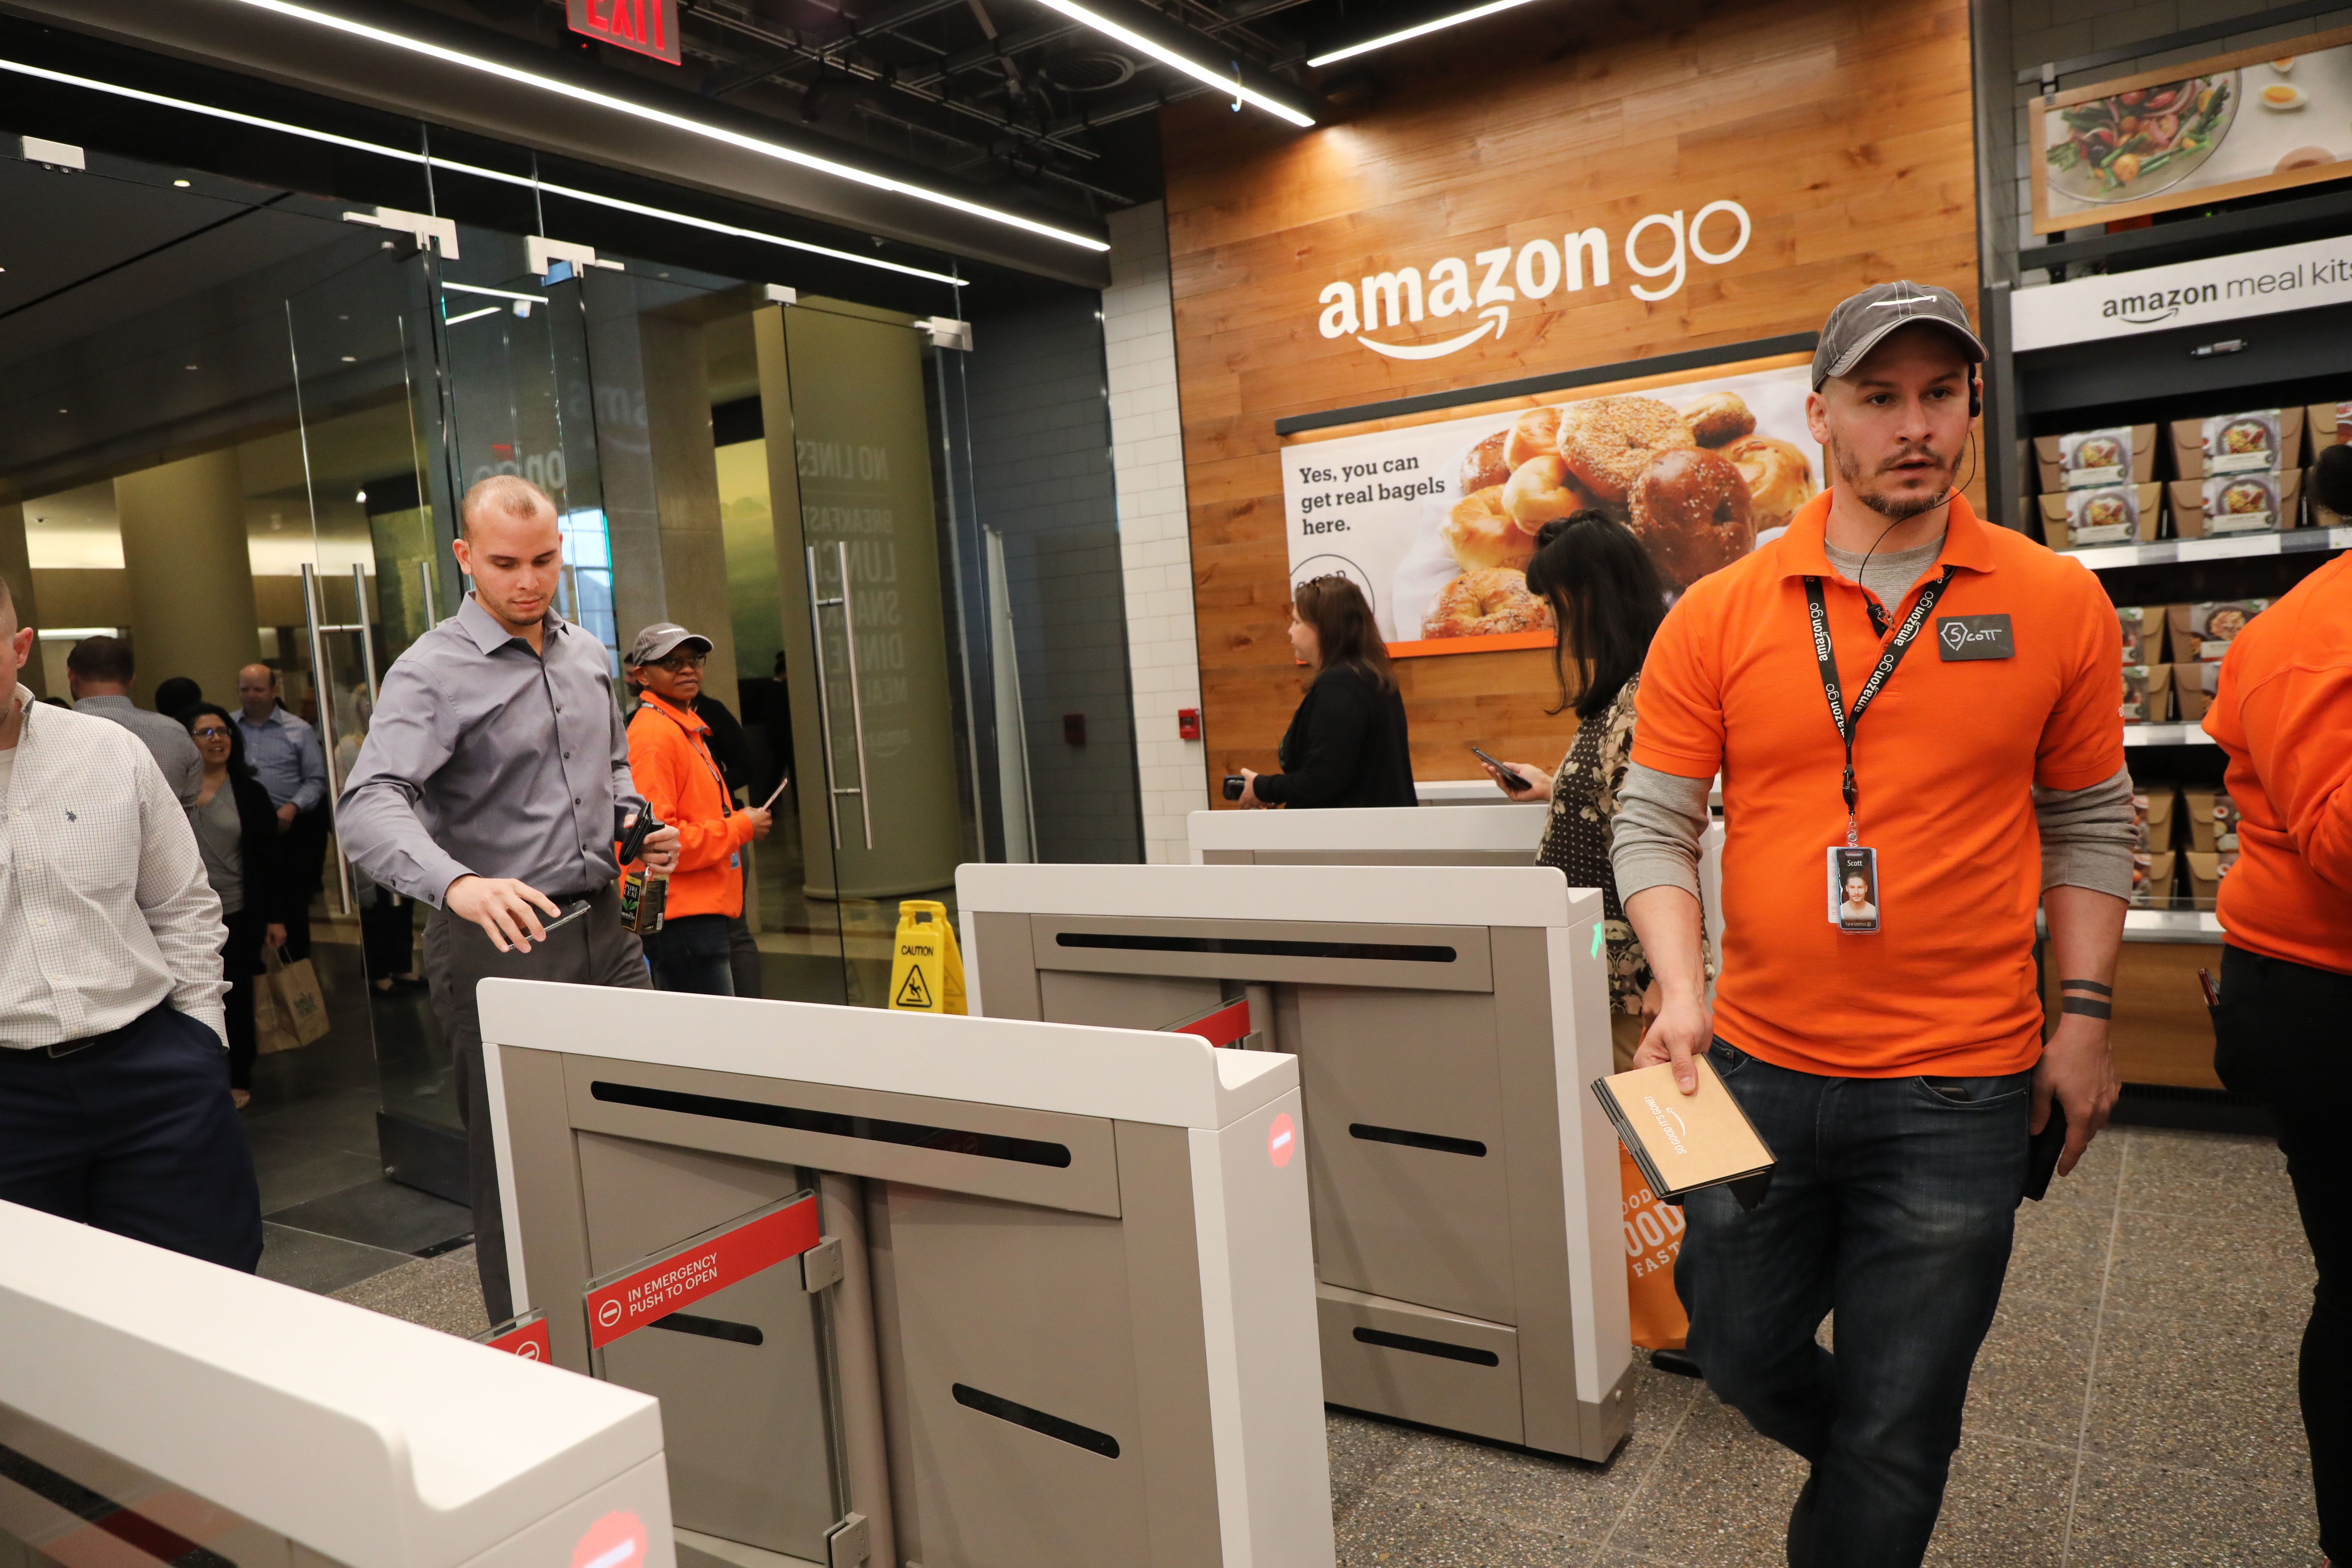 Amazon comes to New York with another one of its cashier-free stores